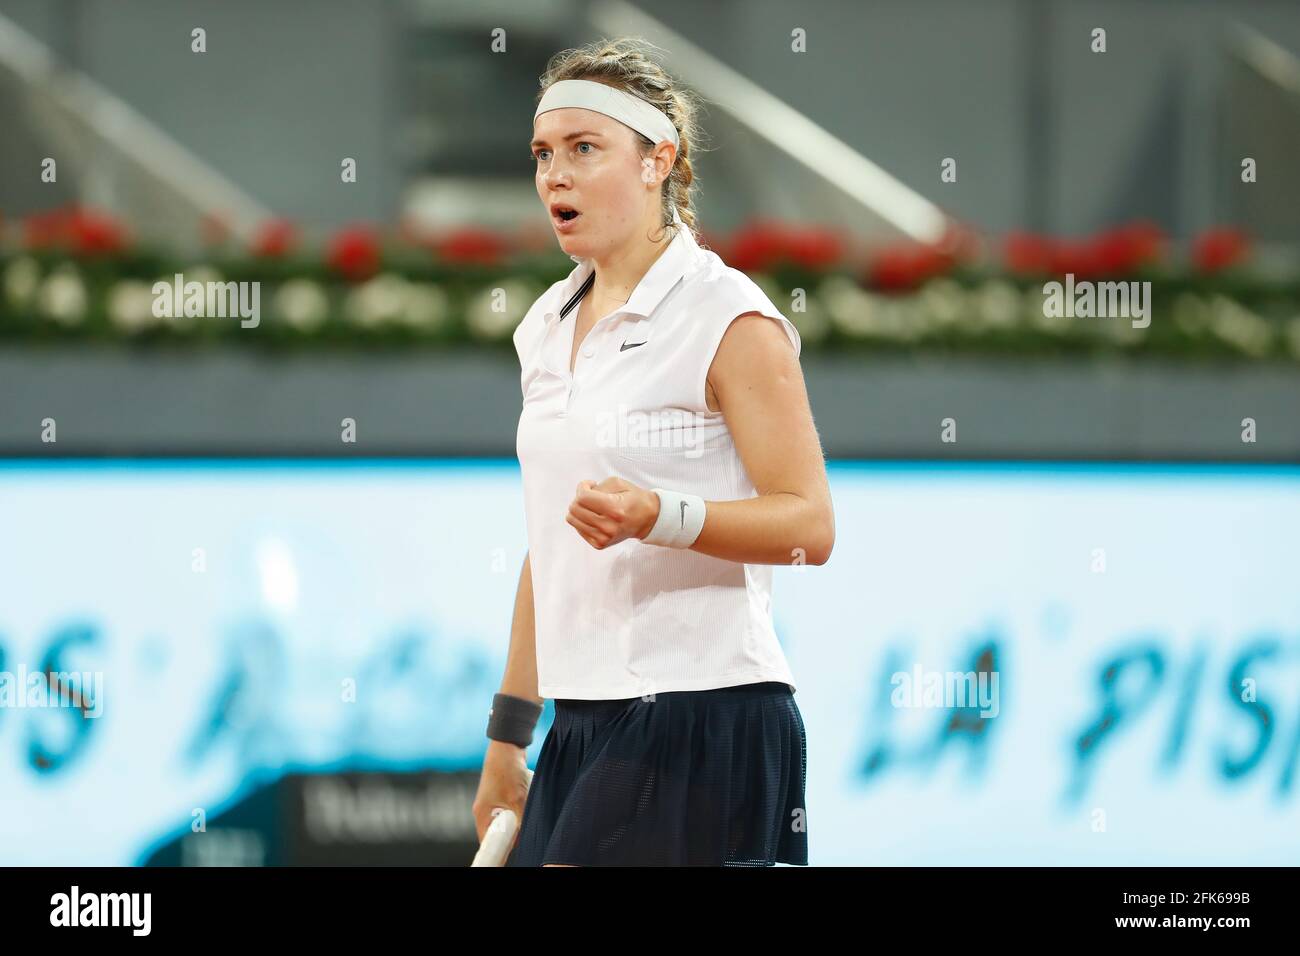 Madrid, Spain. 28th Apr, 2021. Stefanie Voegele (SUI) Tennis : Stefanie  Voegere of Switzerland celebrate after point during qualifying singles 2nd  round match against Camelia-Irina Begu of Romania on the WTA 1000 "